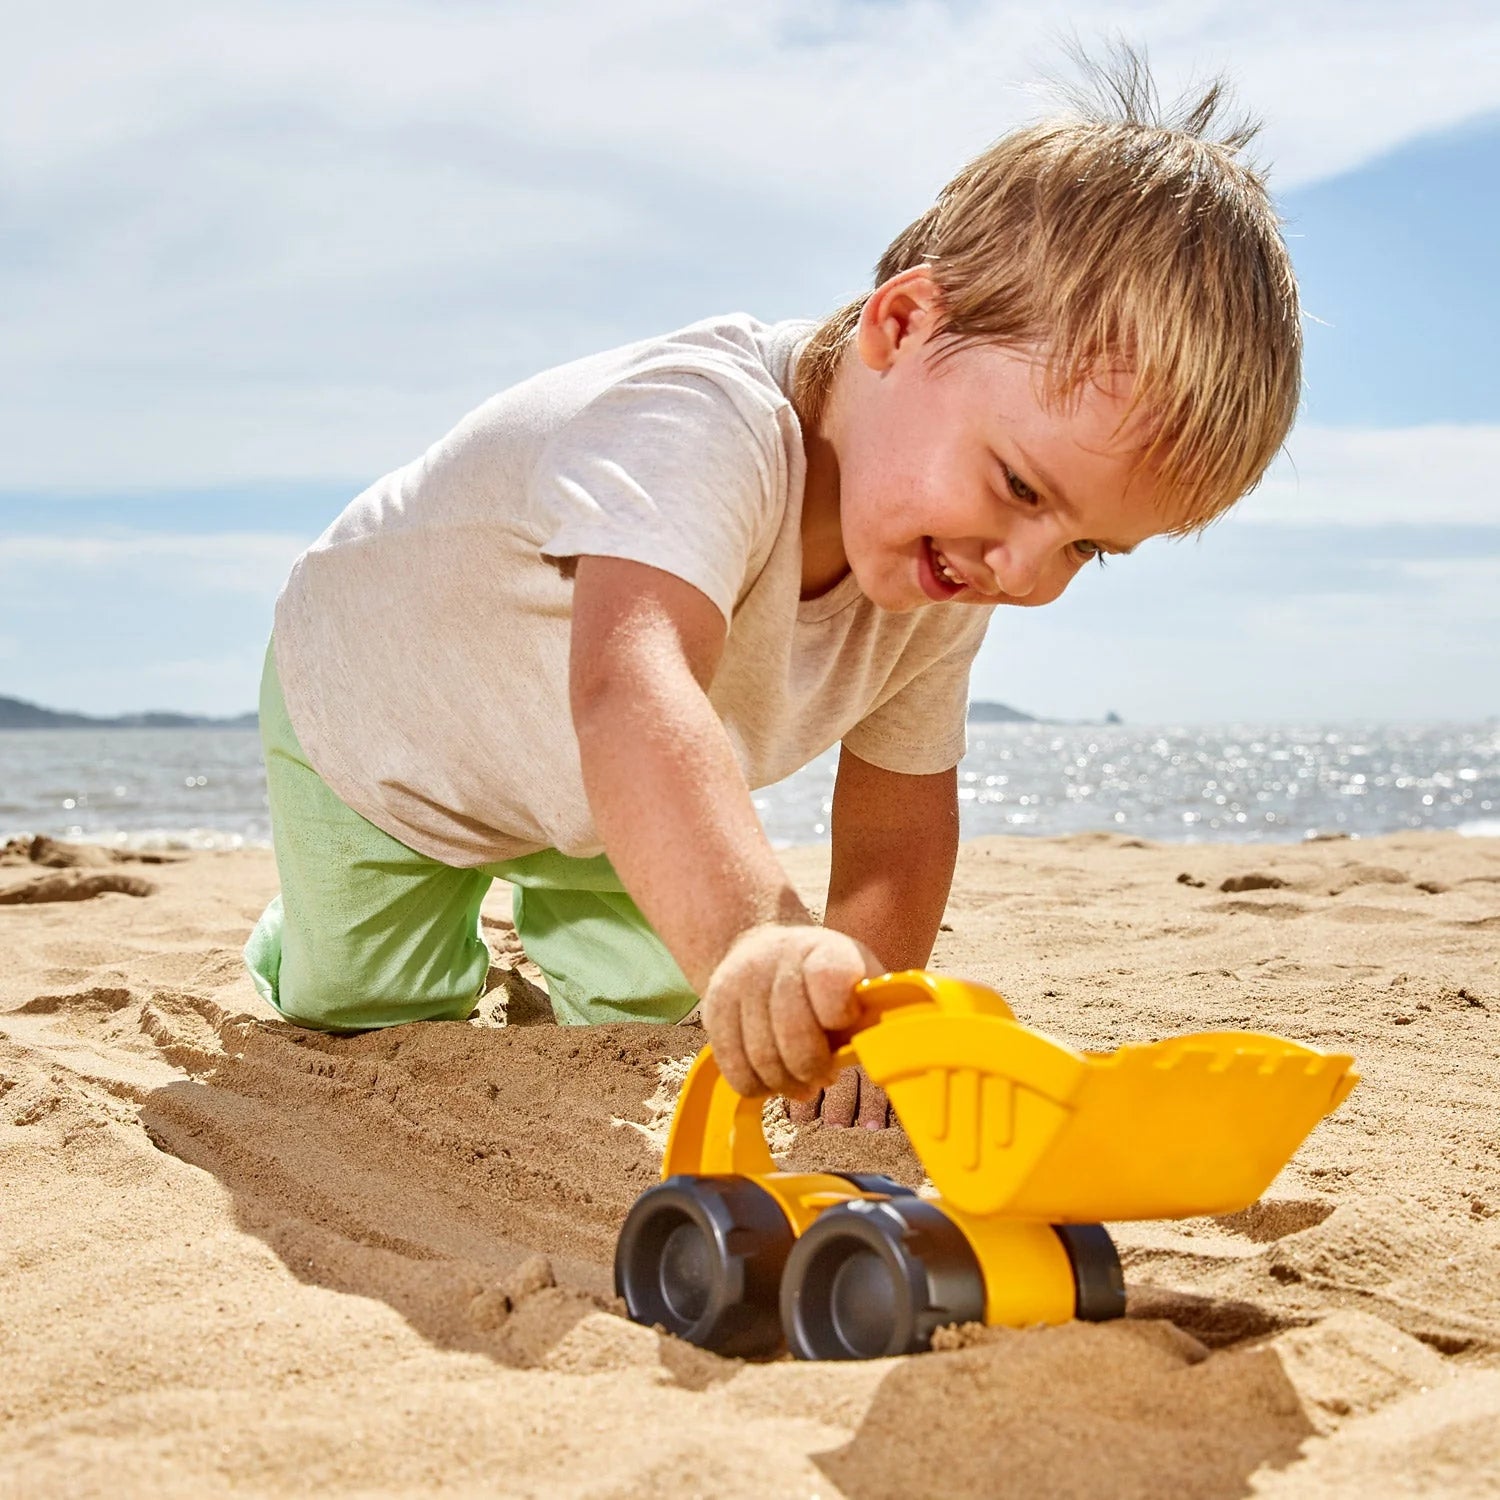 A child playing with a Hape Monster Digger in the sand. The child is using the digger to scoop up sand and pile it up. The digger is yellow and green with a large, scoop-shaped bucket on the front.